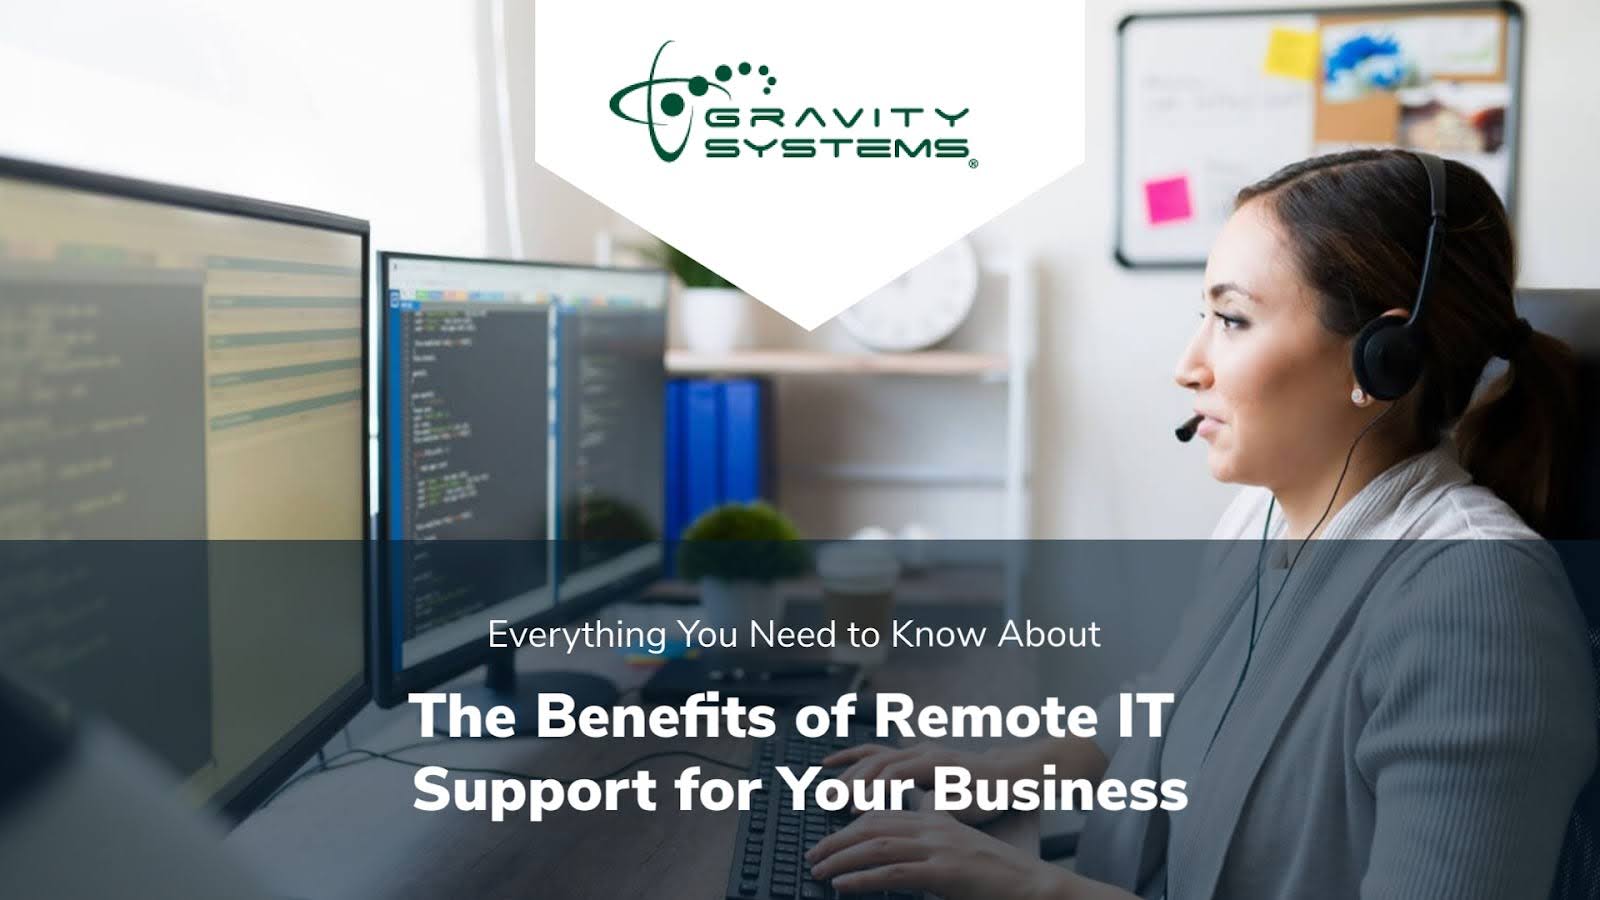 Remote IT Support Benefits